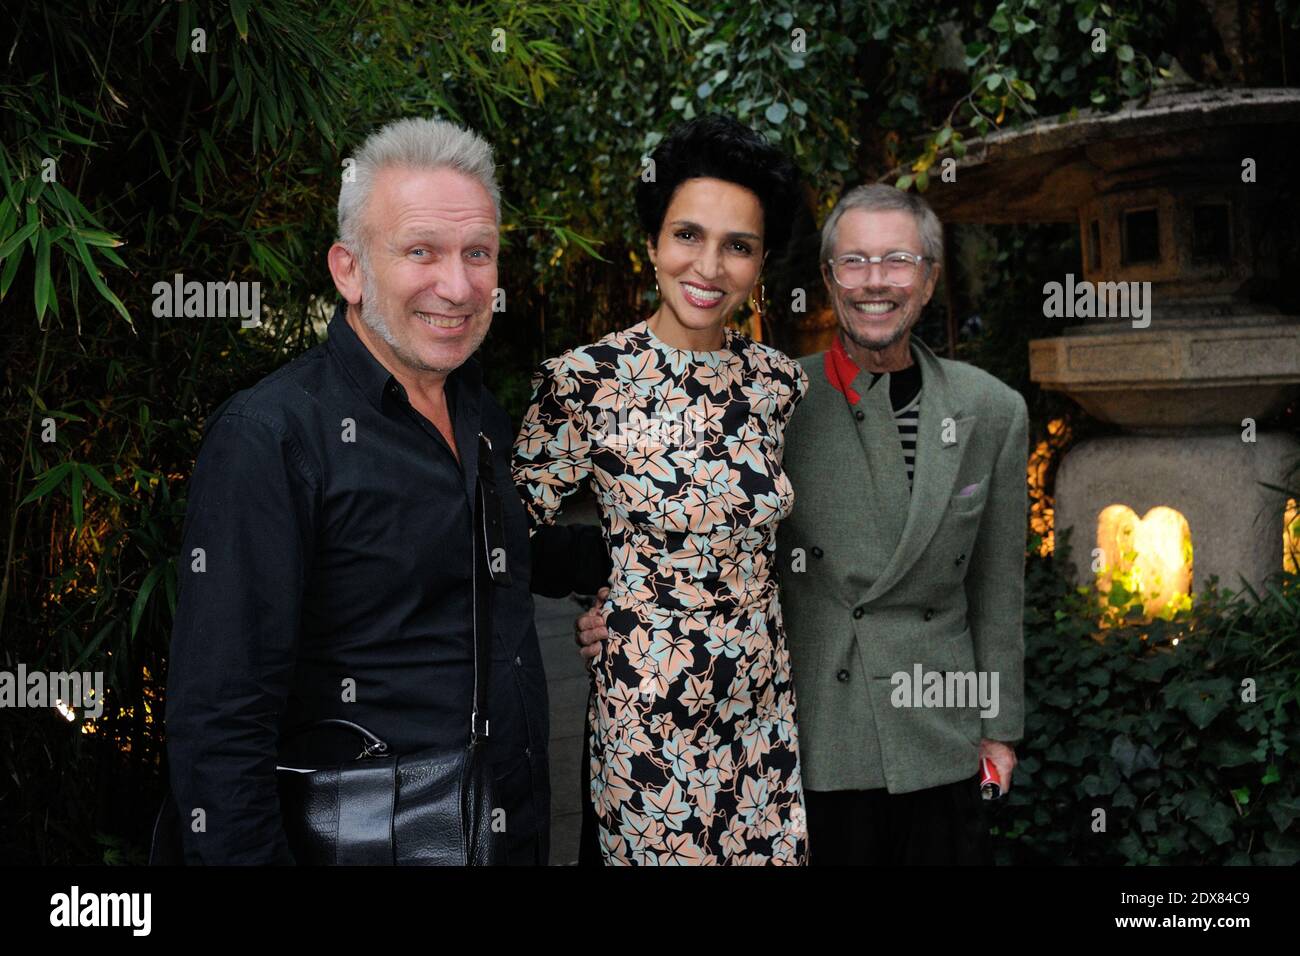 Farida Khelfa, Jean-Paul Goude, Jean Paul Gaultier attending the Louboutin  Documentary Premiere at Cinema La Pagode in Paris, France, on September 9,  2014. Photo by Alban Wyters/ABACAPRESS.COM Stock Photo - Alamy